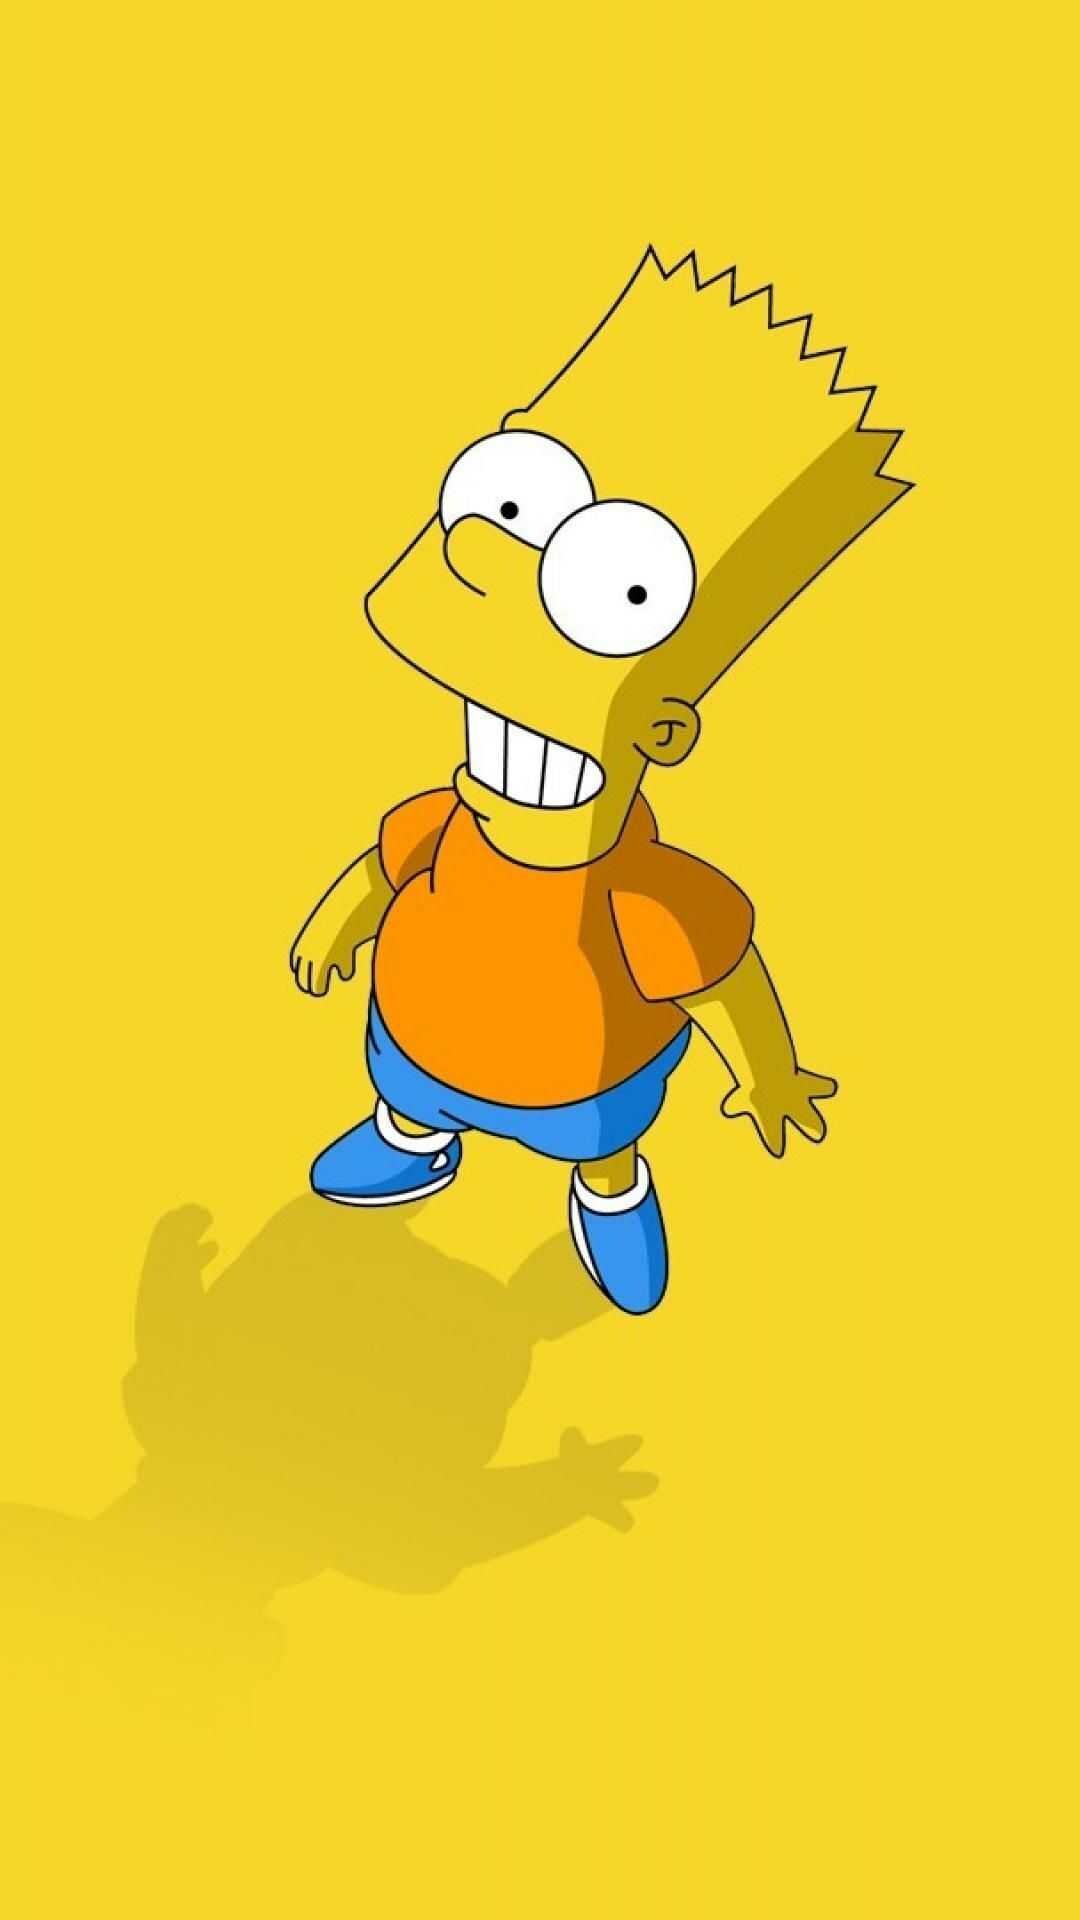 The Simpsons: Bartholomew JoJo "Bart", voiced by Nancy Cartwright, Fictional character. 1080x1920 Full HD Background.